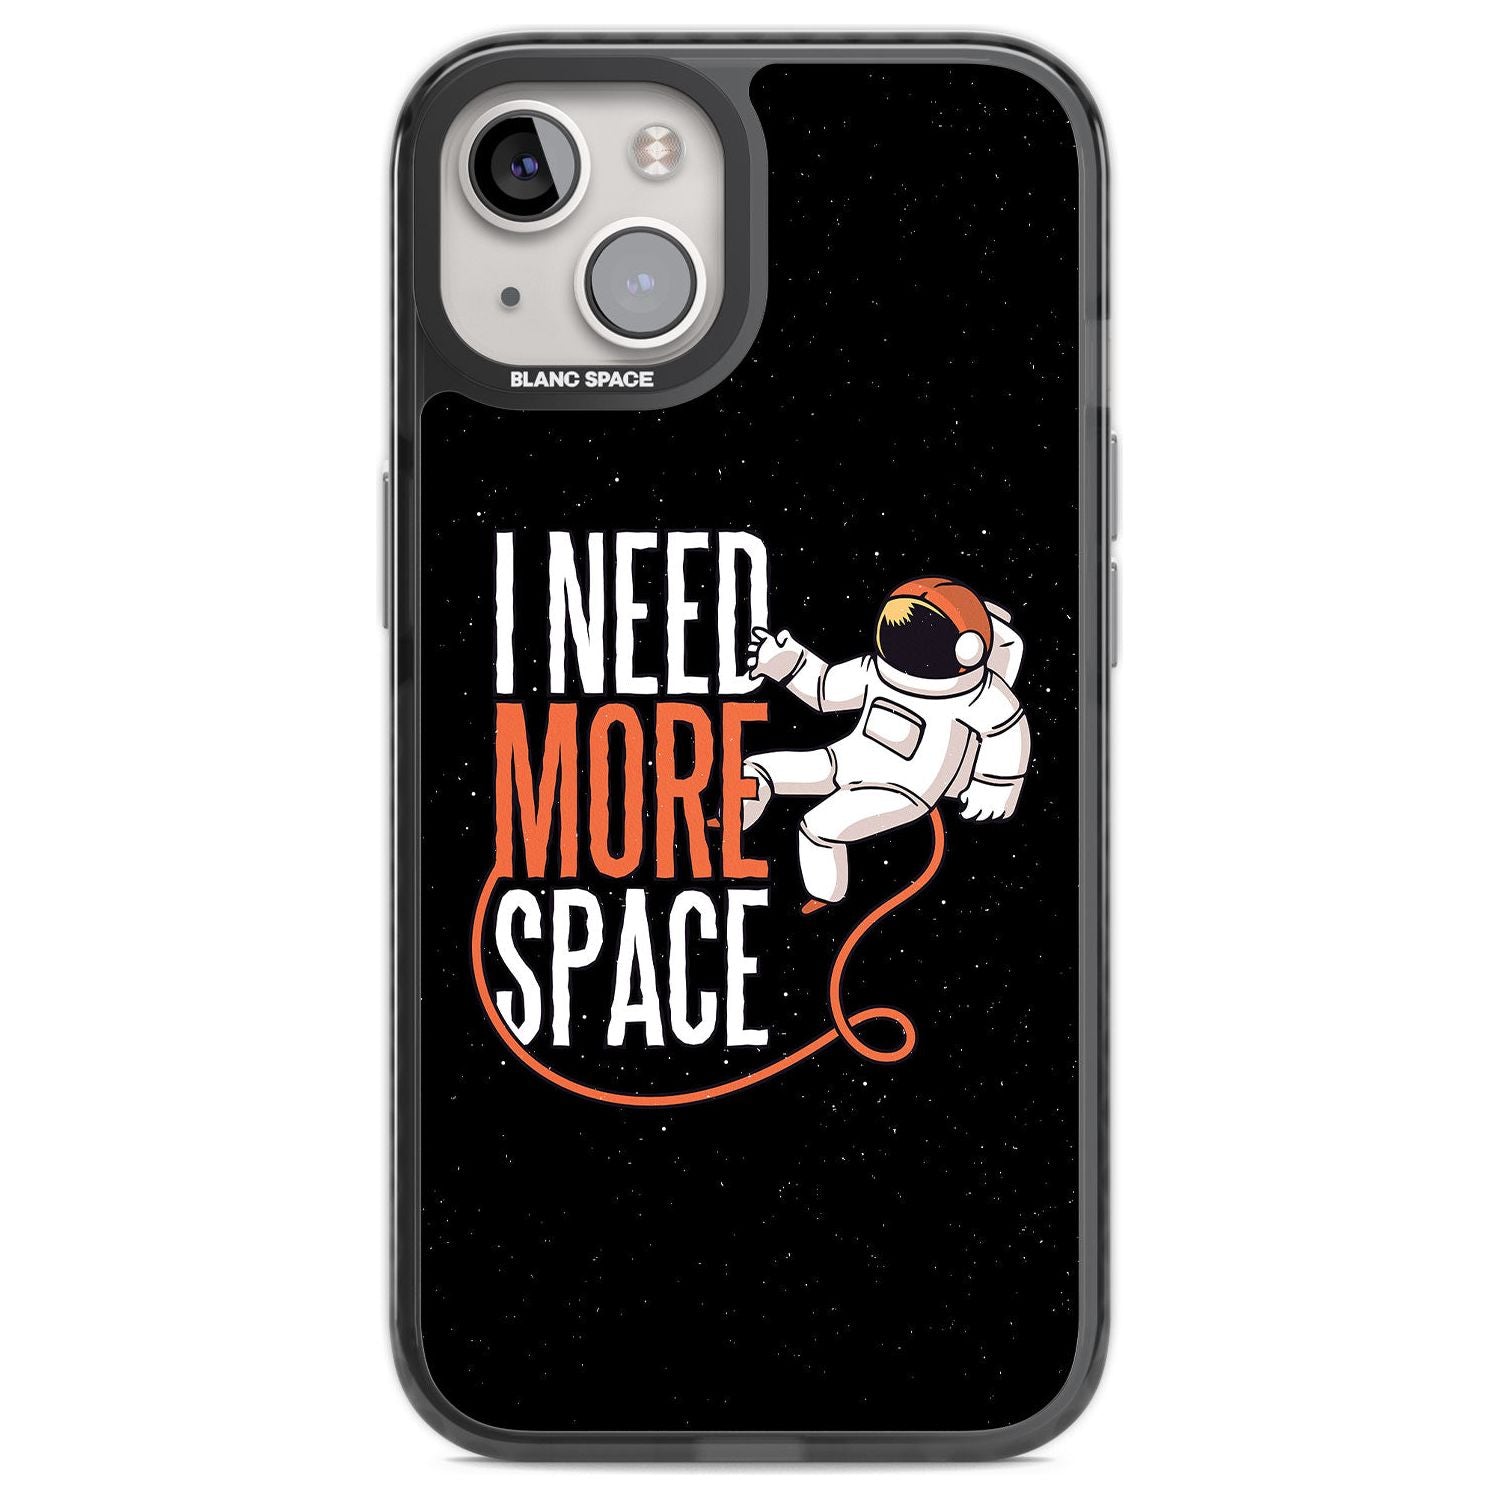 I Need More Space Phone Case iPhone 12 / Black Impact Case,iPhone 13 / Black Impact Case,iPhone 12 Pro / Black Impact Case,iPhone 14 / Black Impact Case,iPhone 15 Plus / Black Impact Case,iPhone 15 / Black Impact Case Blanc Space